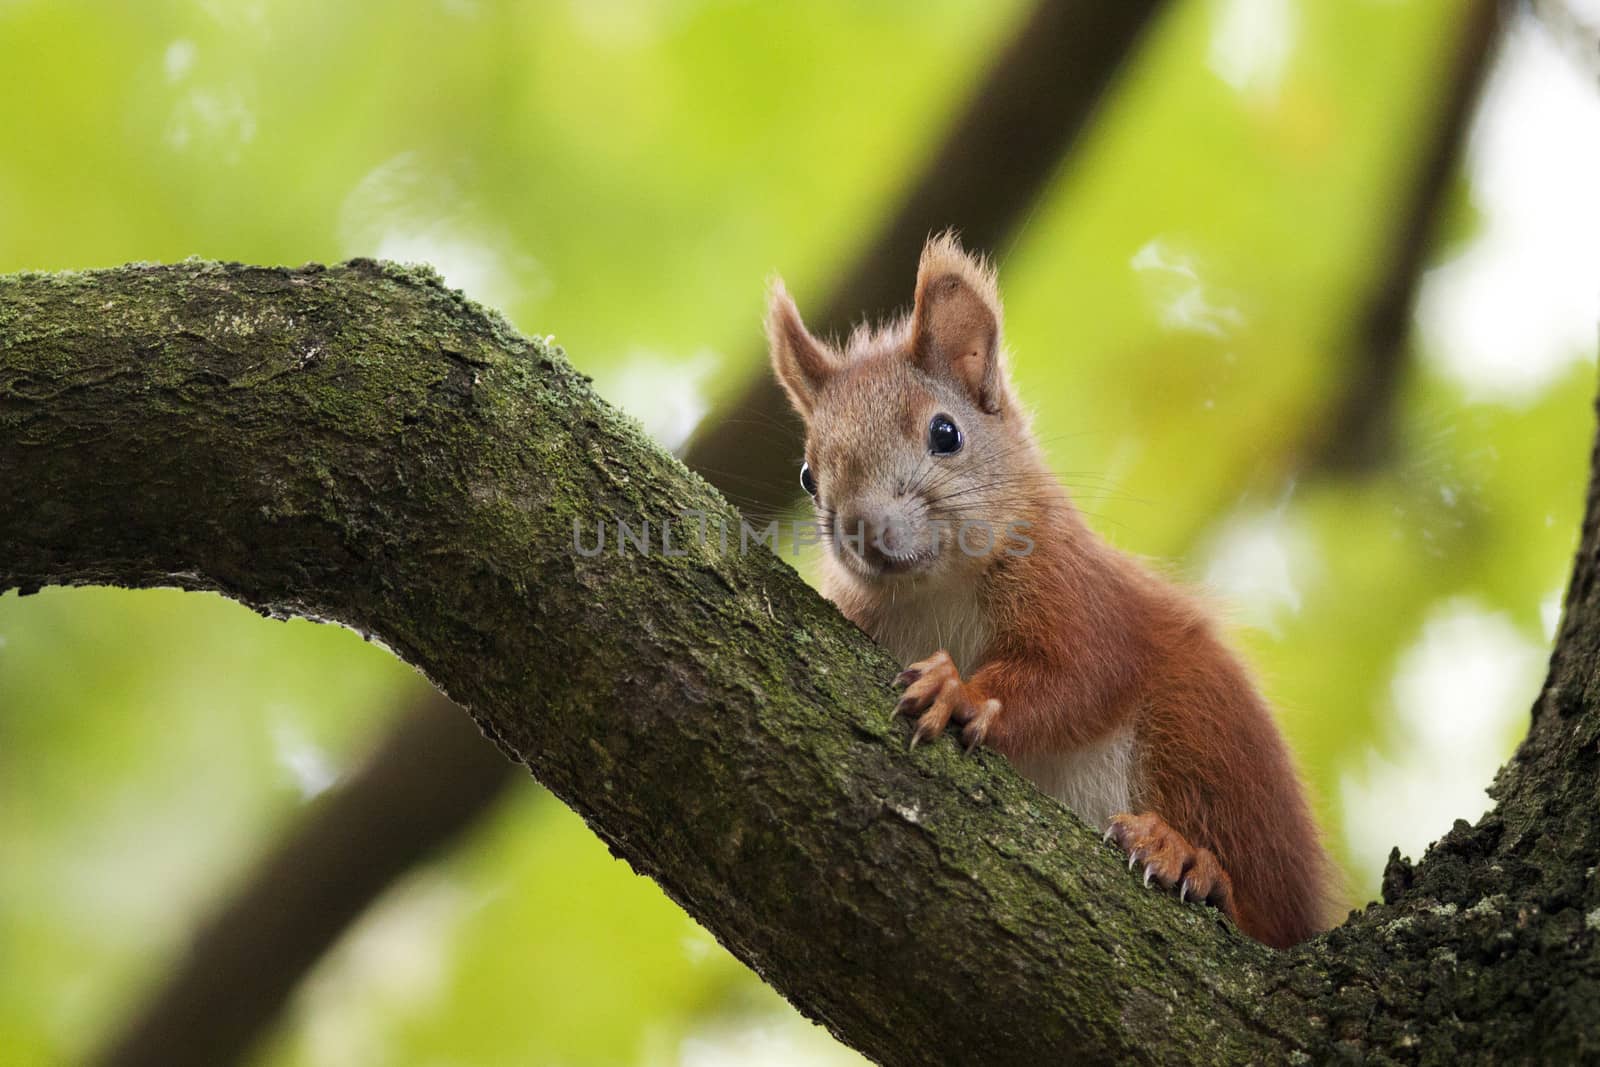 The red squirrel in the forest. by johan10